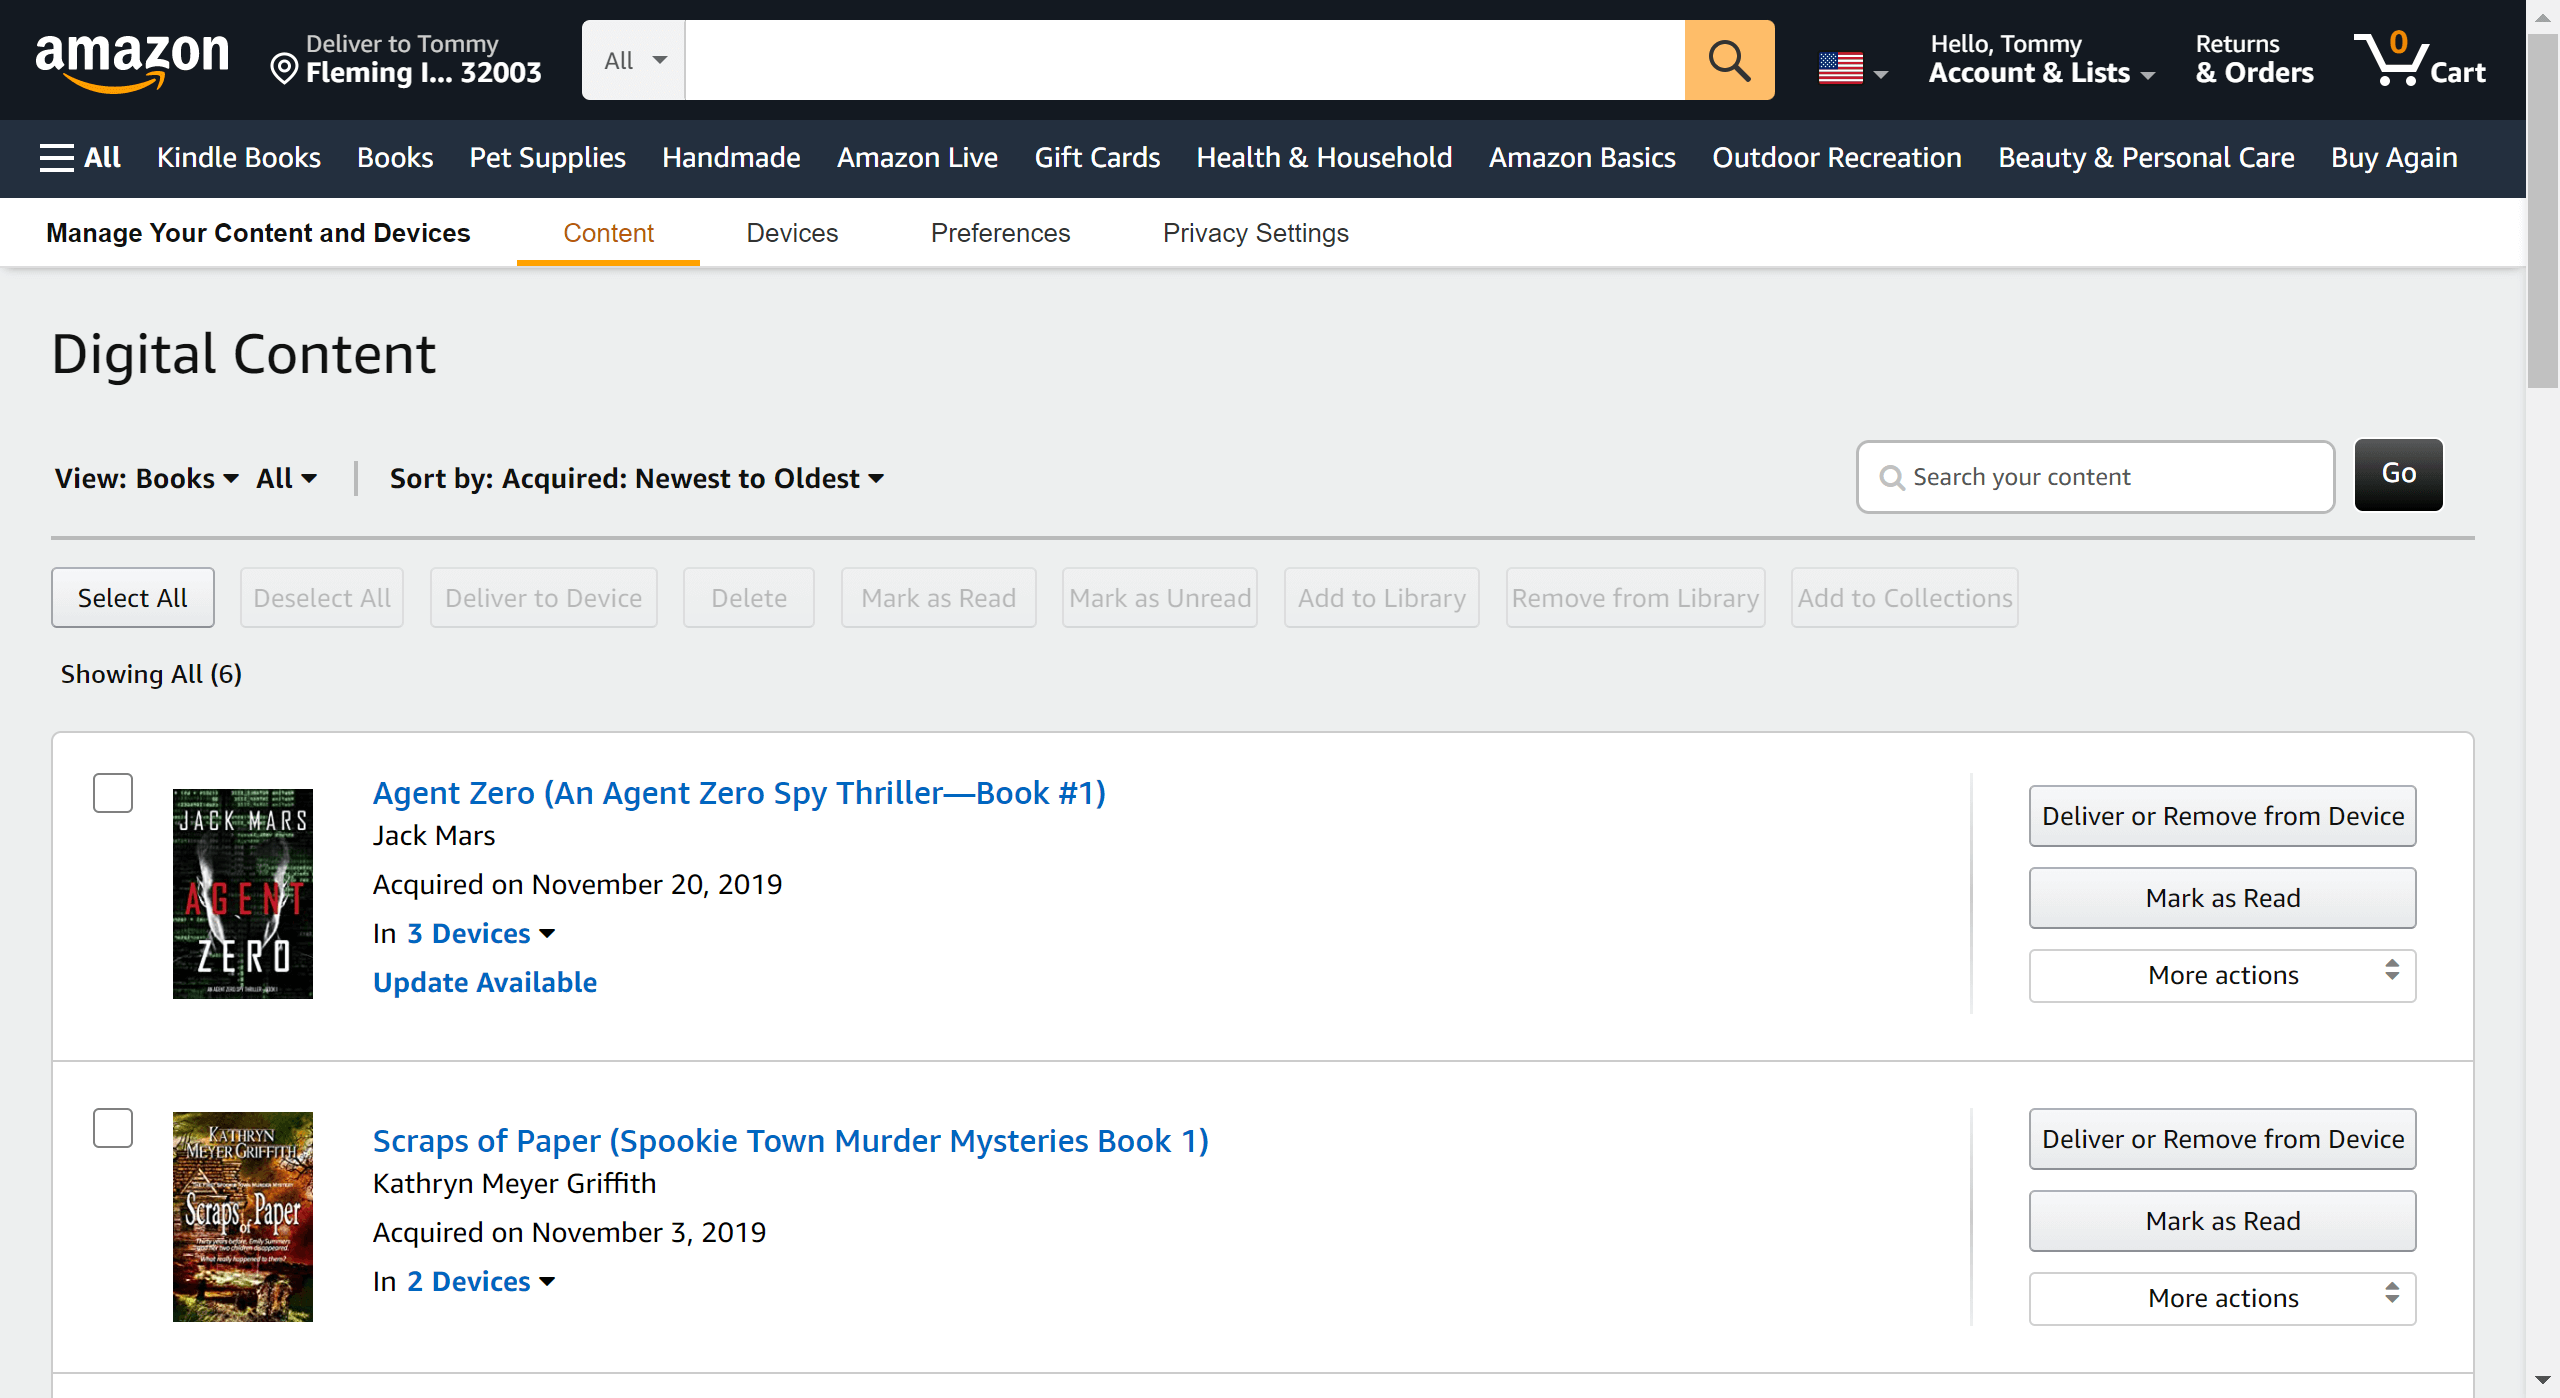 Amazon's Manage Your Content Website Page